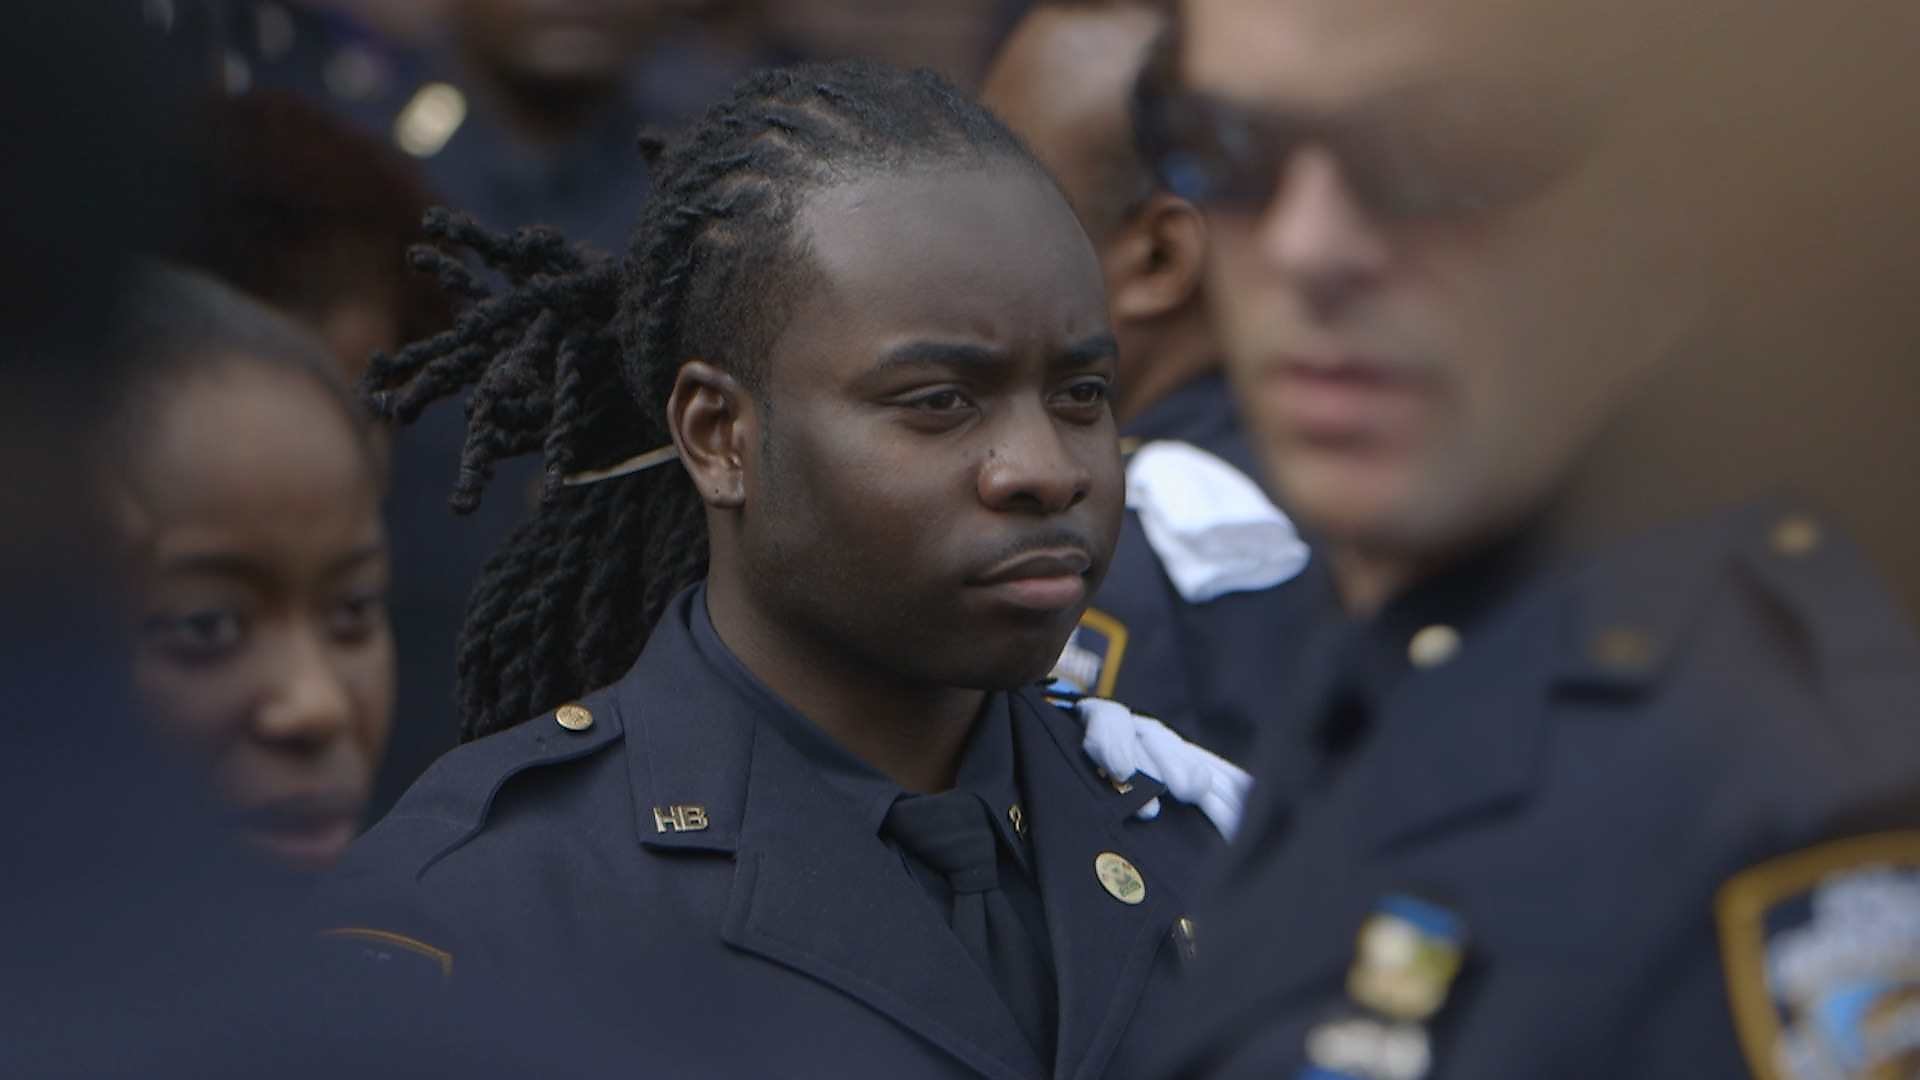 'Crime + Punishment’ a compelling look at alleged quotas in New York policing - SFGate